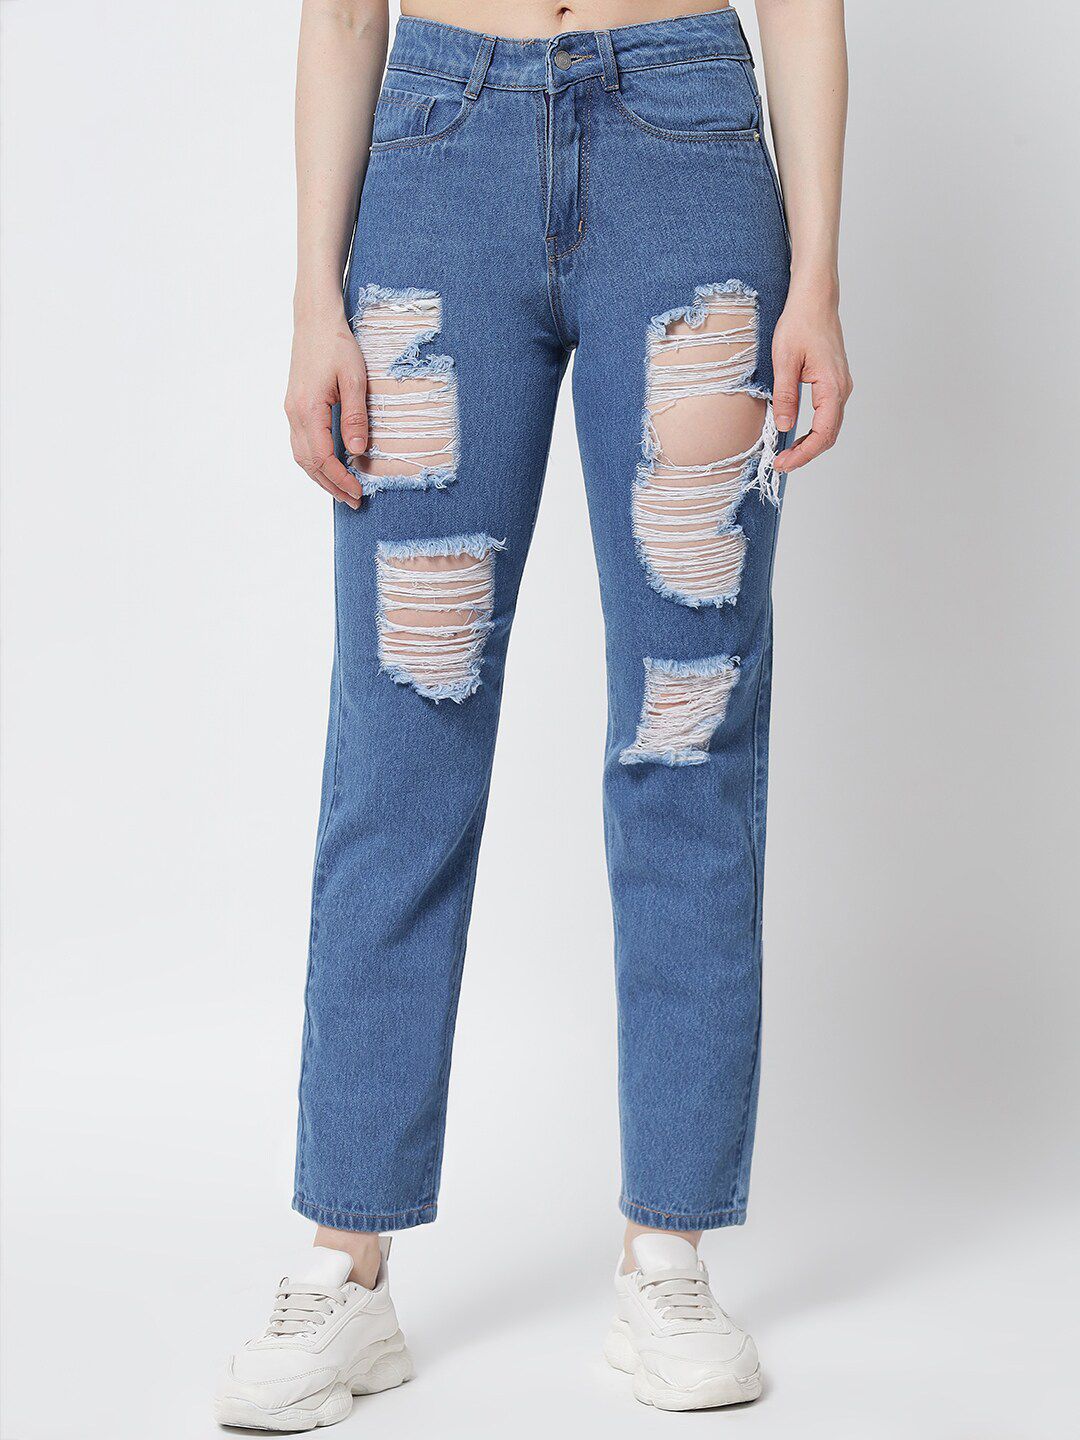 River Of Design Jeans Women Blue Regular Fit High-Rise Highly Distressed Jeans Price in India